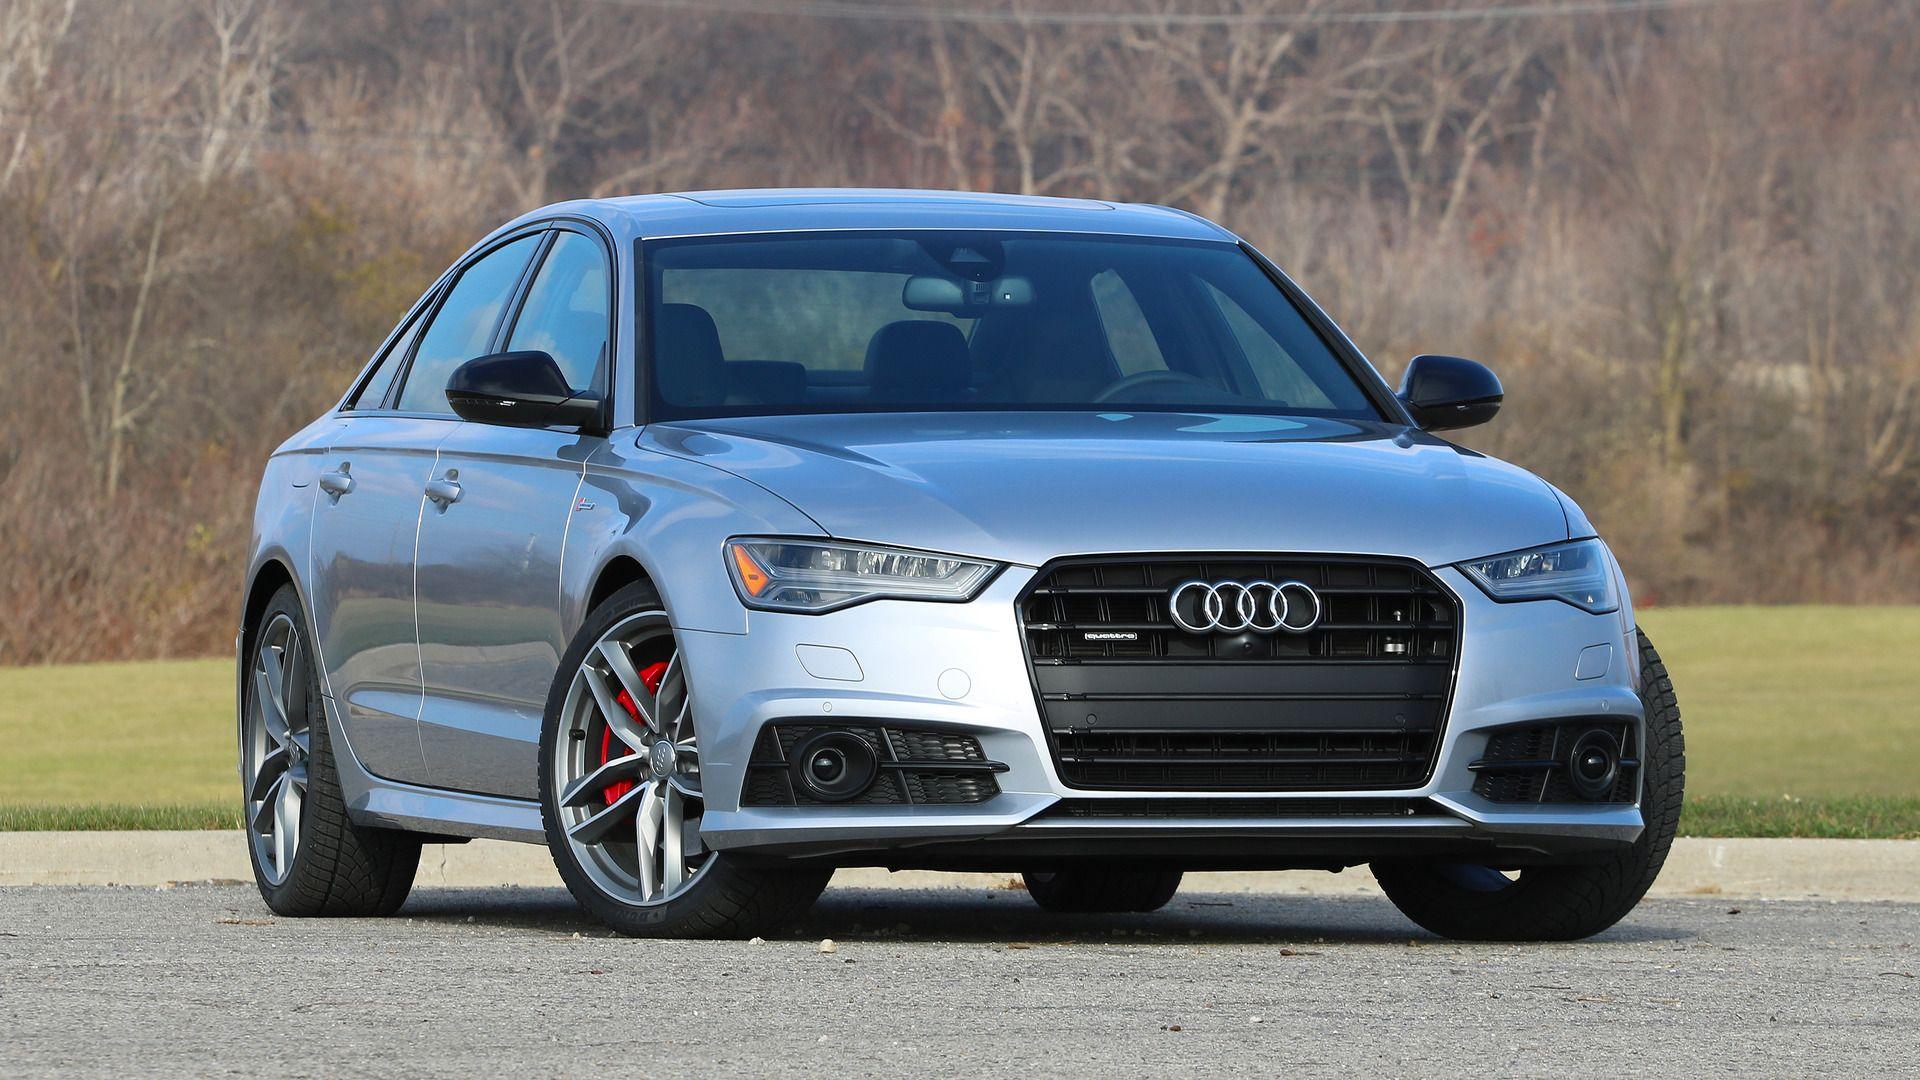 Audi A6 Sport Coming To U.S. With $175 Starting Price